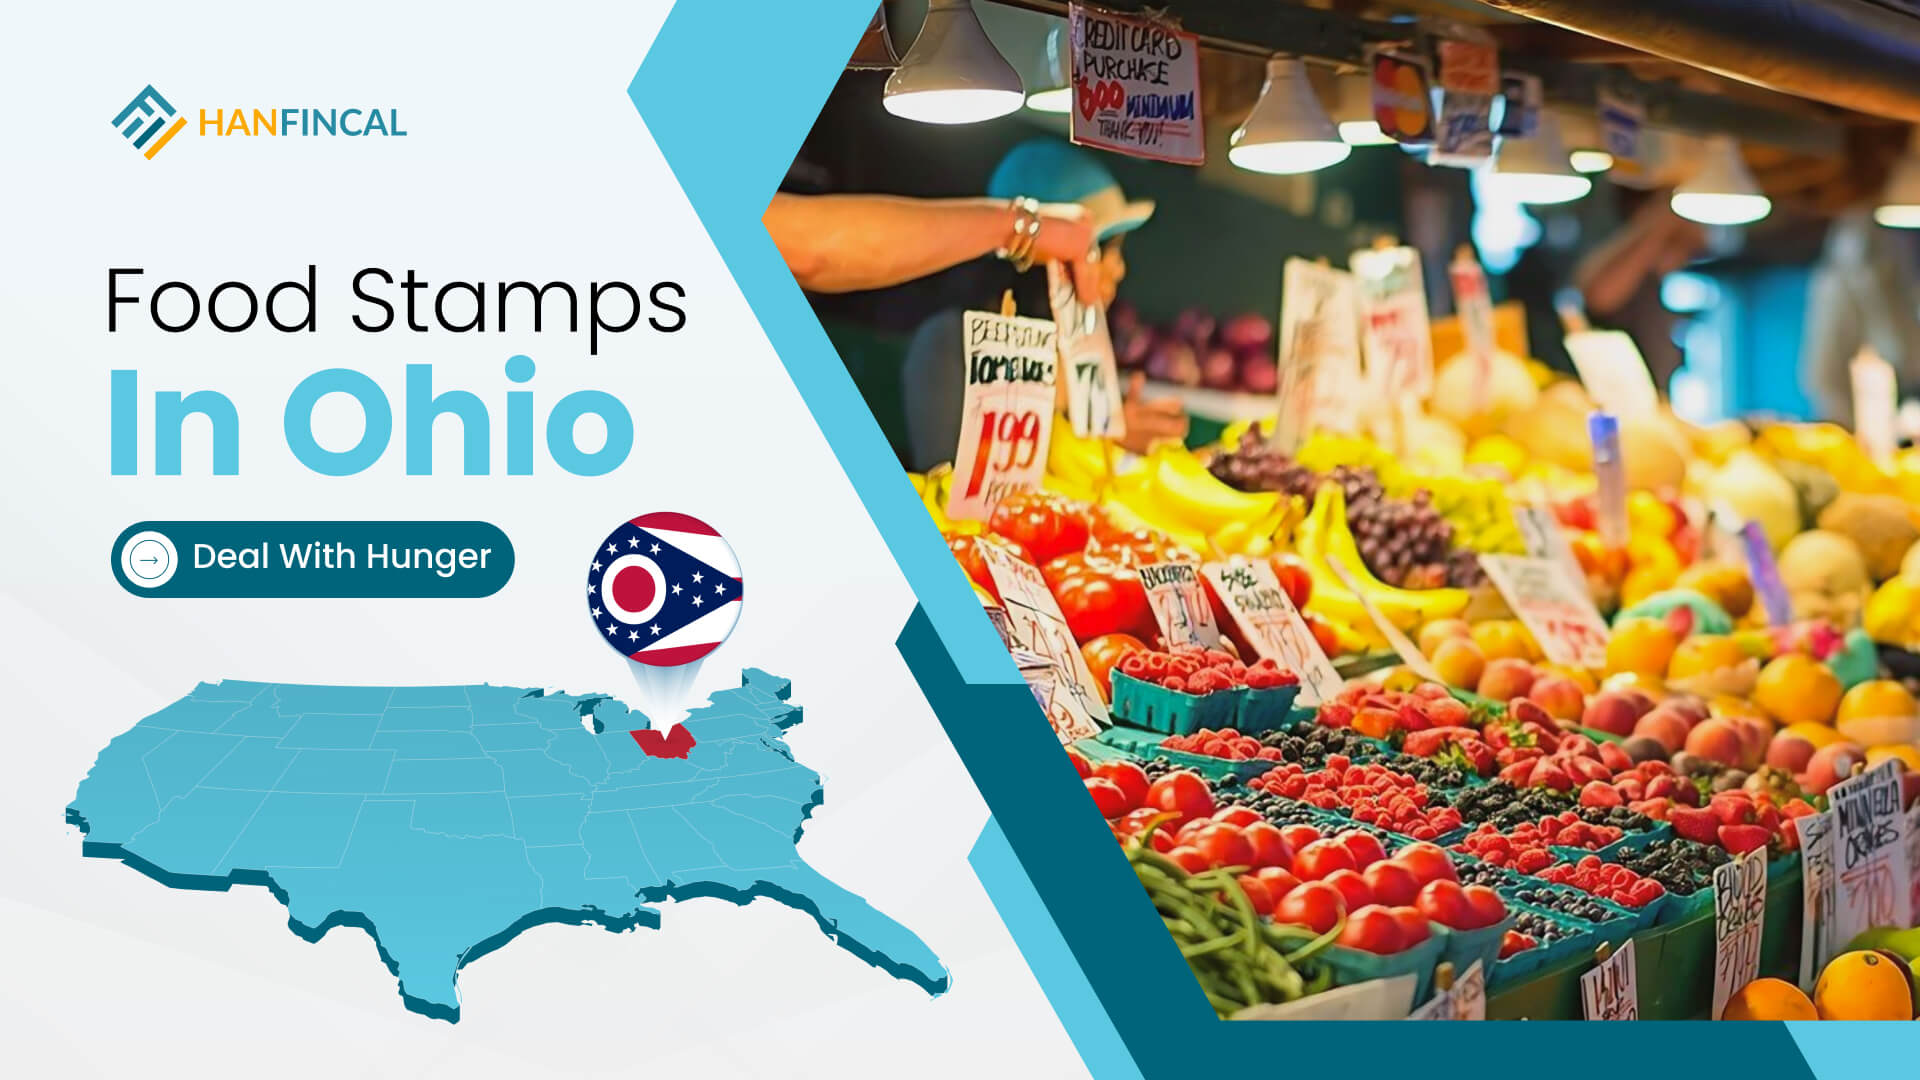 ohio food stamps application